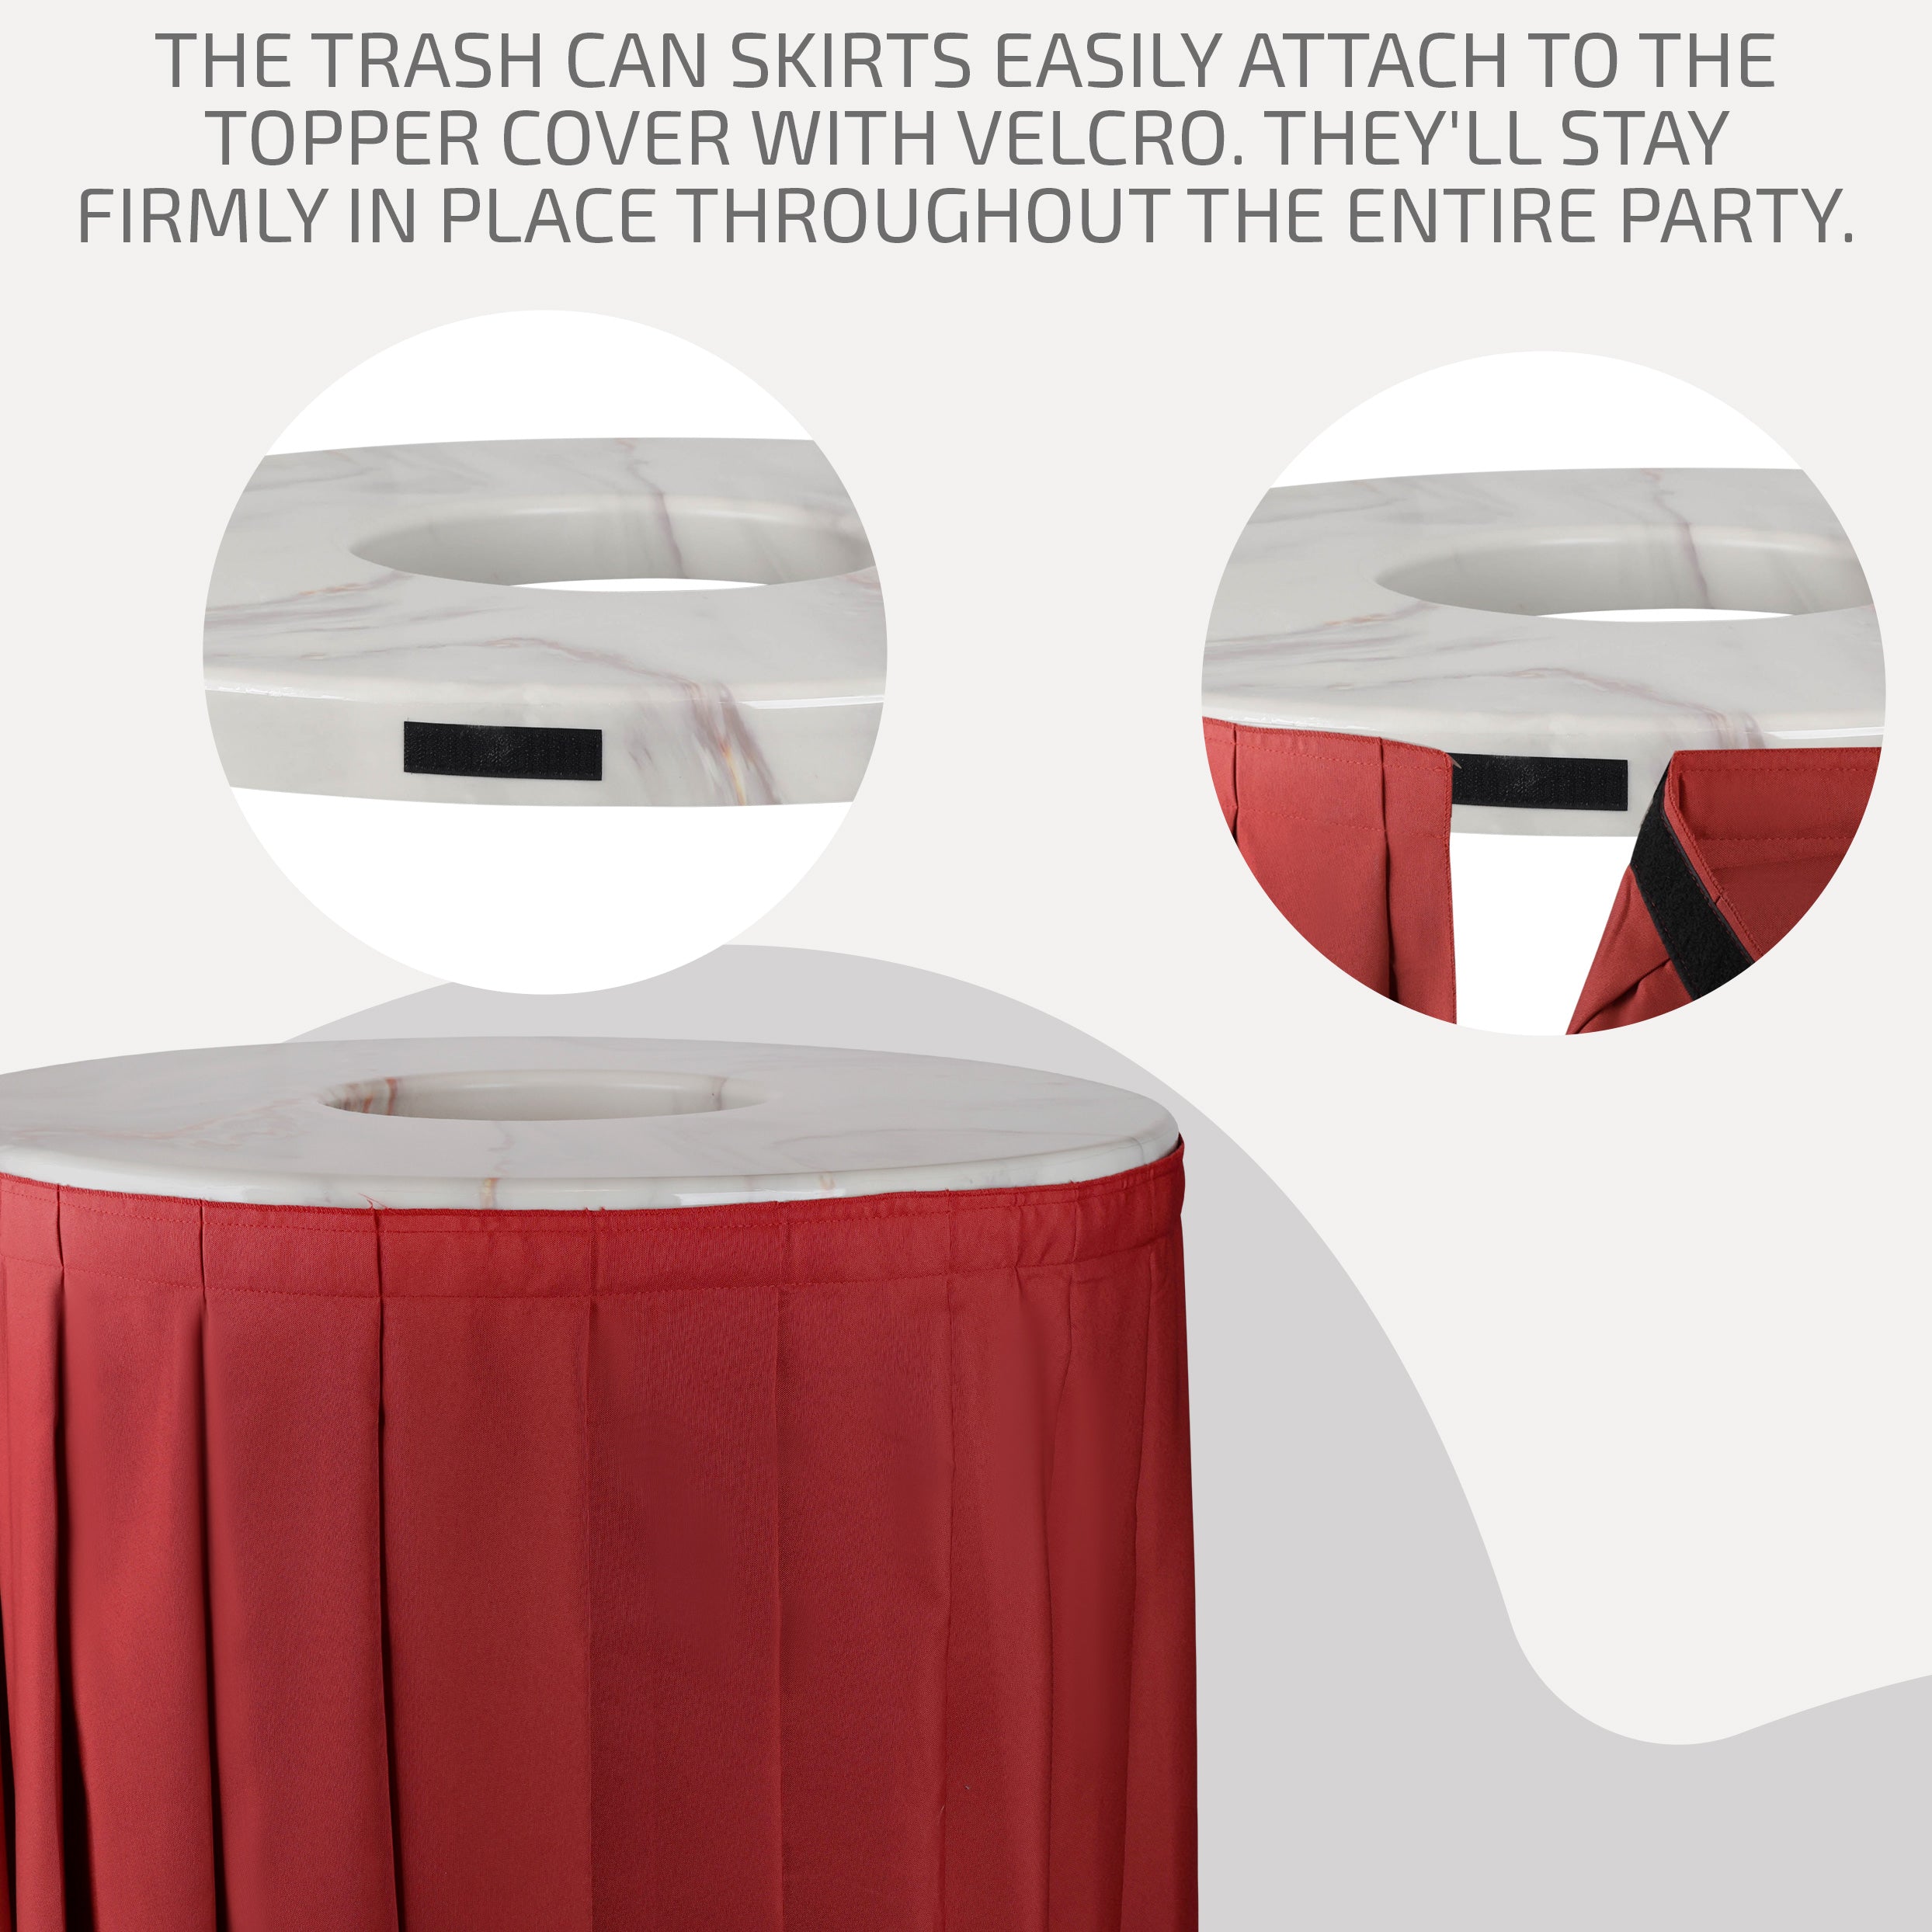 Designed to Fit 44 & 55 Gallon Trash Cans